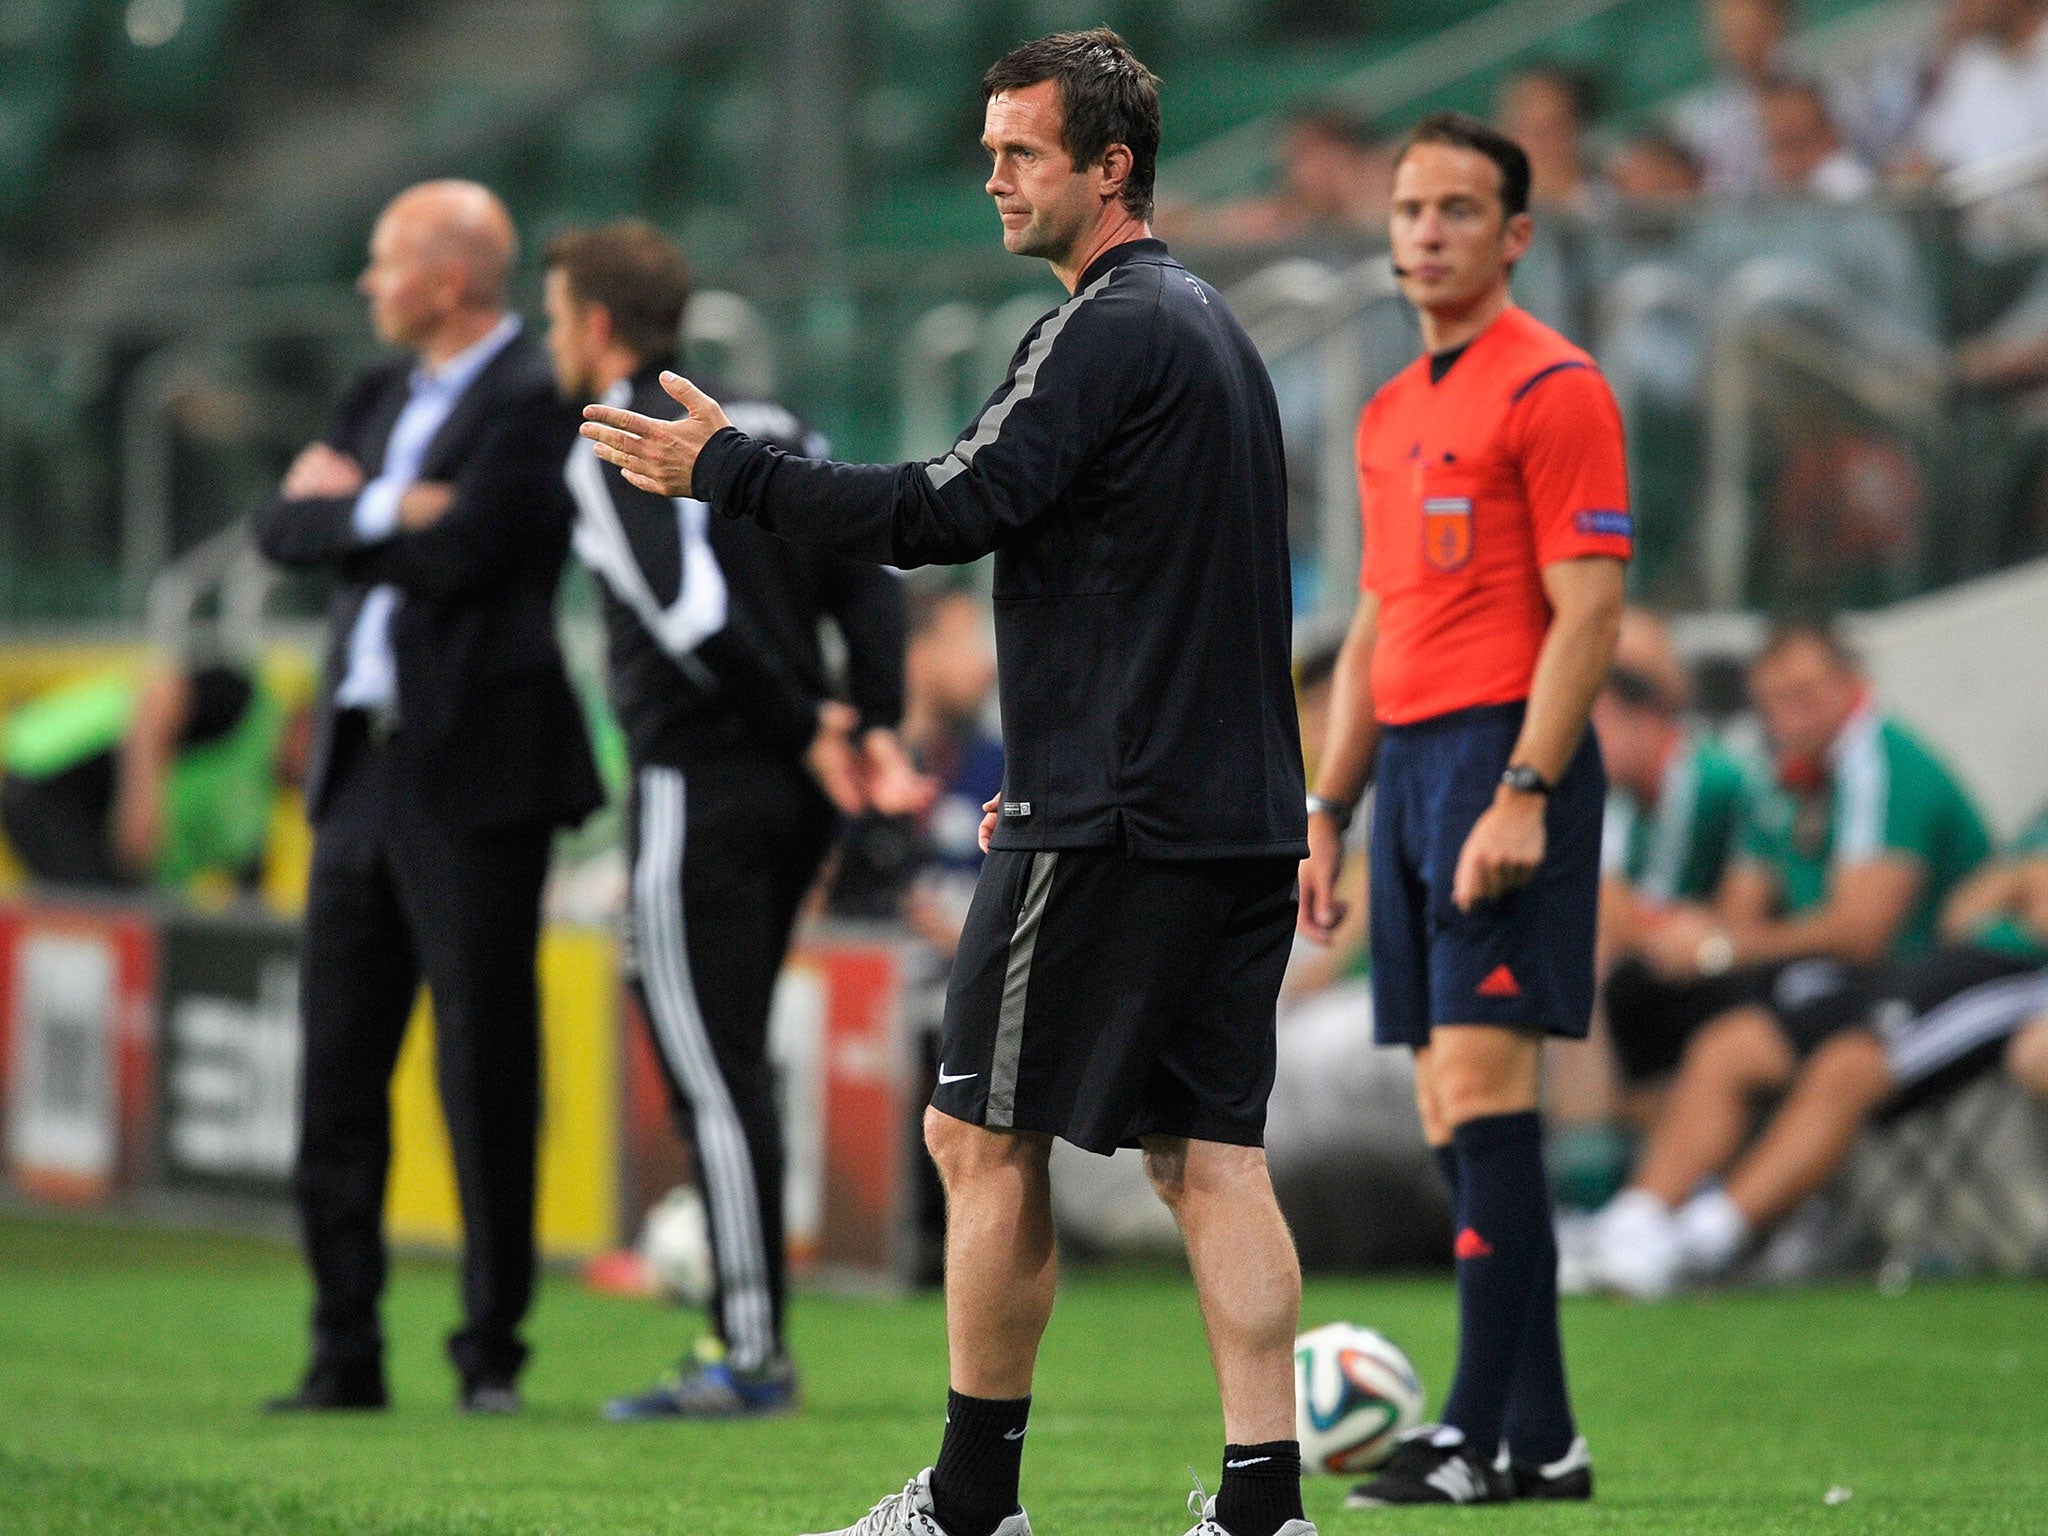 Ronny Delia gestures on the sidelines during Celtic's 4-1 defeat to Legia Warsaw